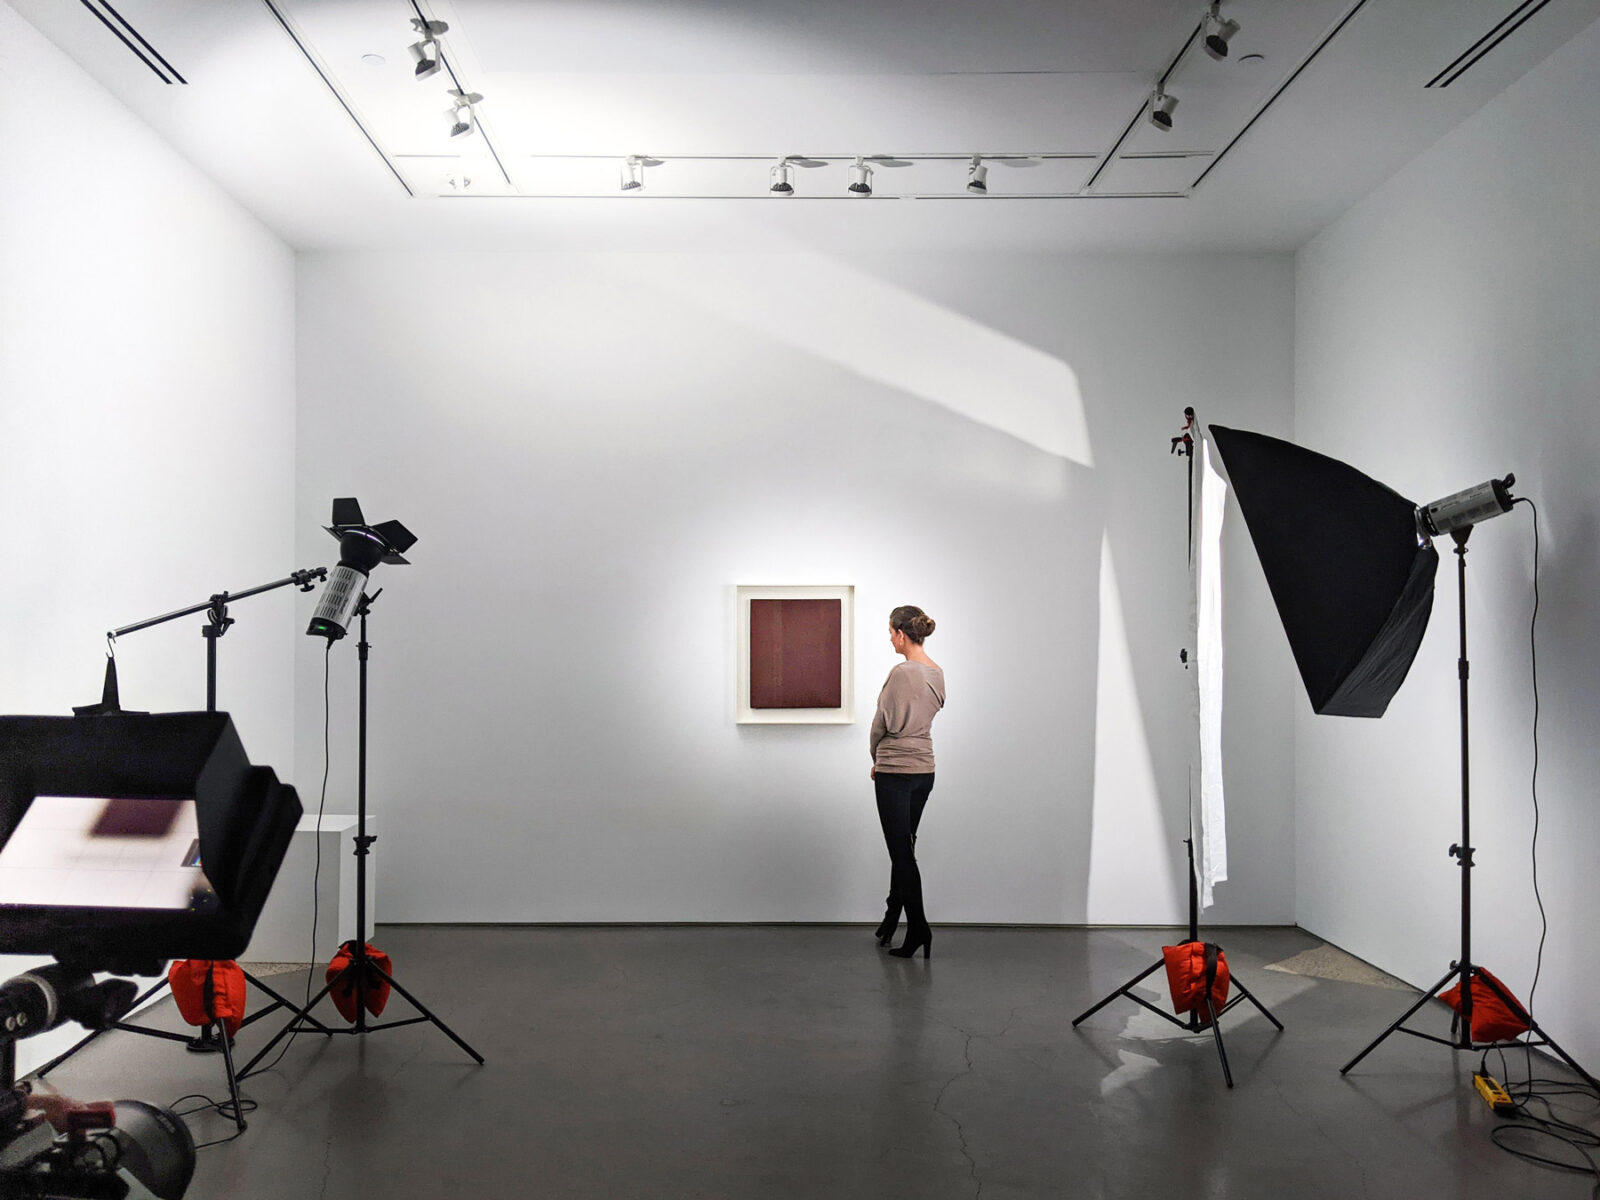 BTS video production of artwork documentation of a red painting in a viewing room gallery with multiple lights, cameras and a viewer.